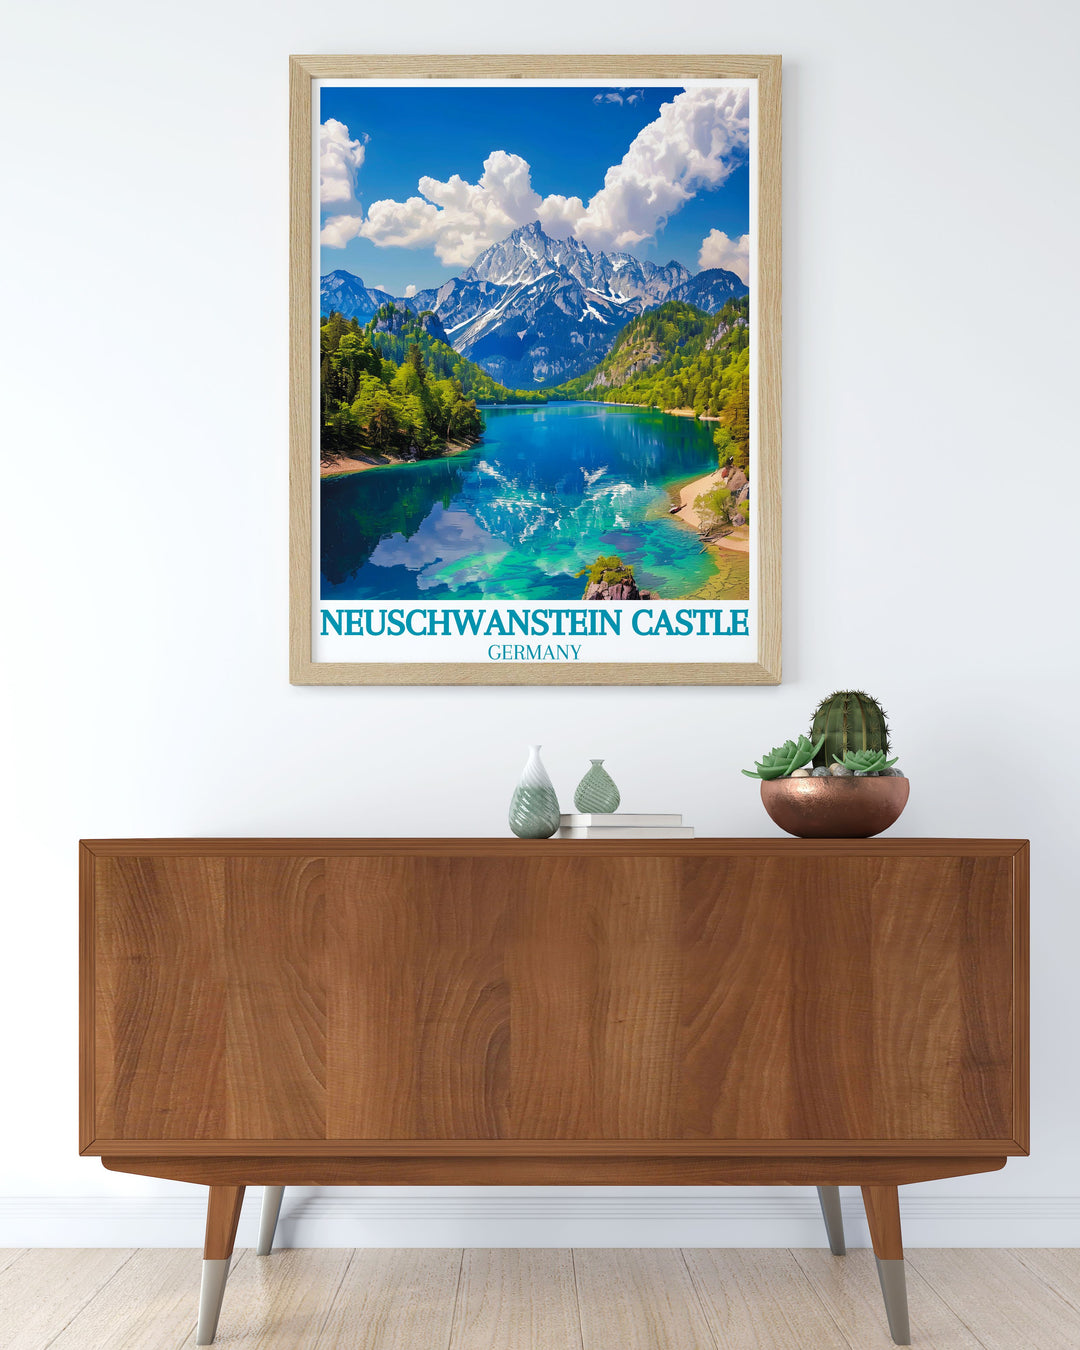 This vibrant art print of Alpsee Lake highlights the serene waters and picturesque landscapes, making it a standout piece for those who appreciate natural beauty and tranquility.